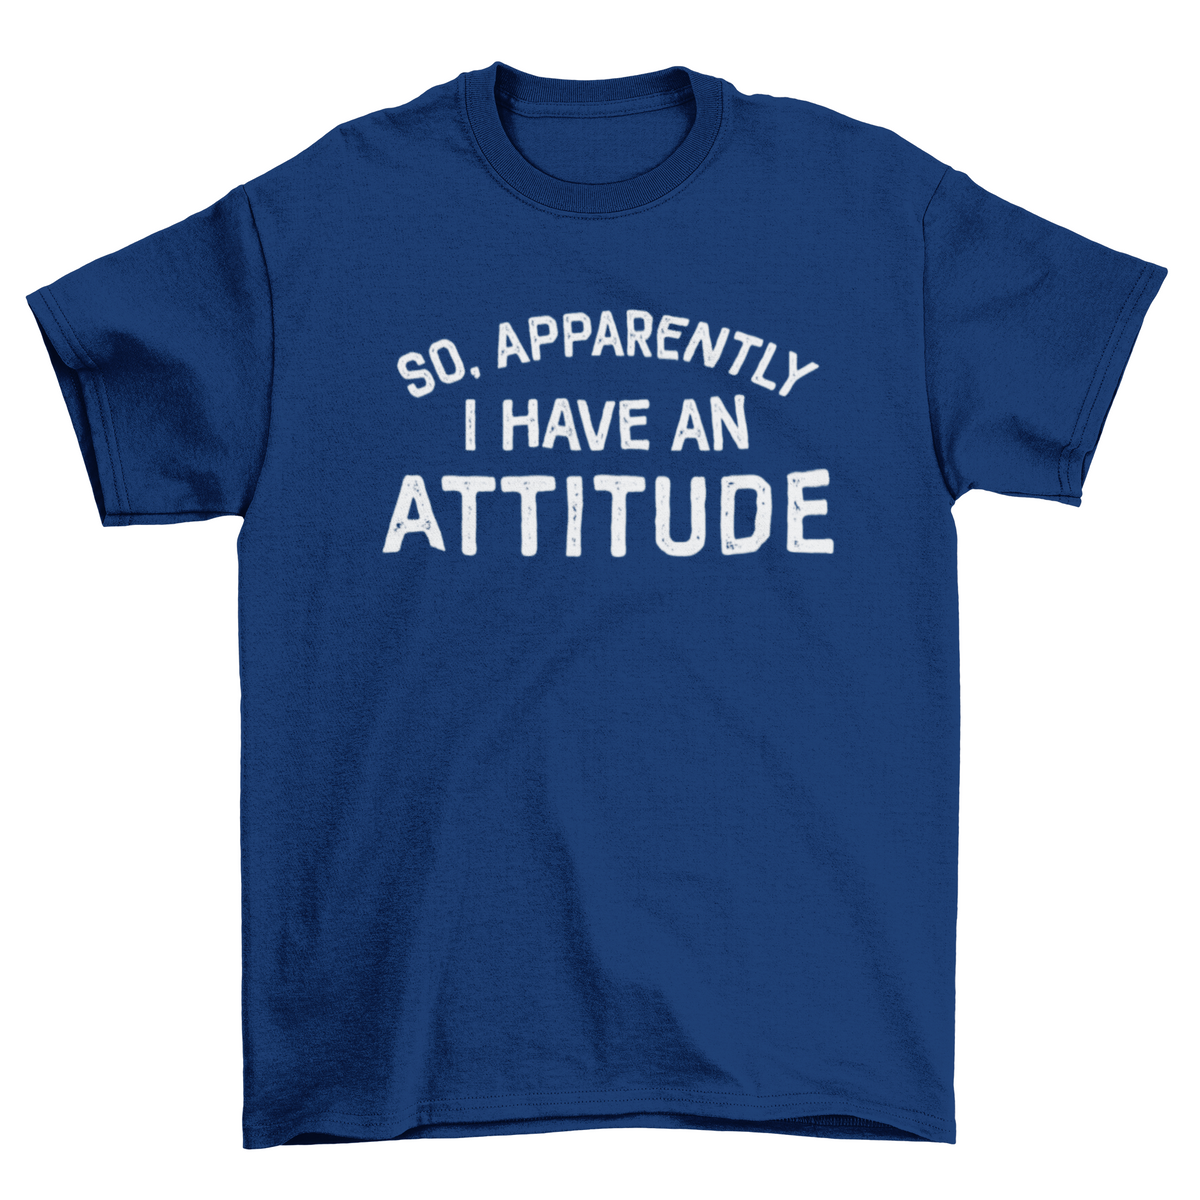 So Apparently, I have An Attitude